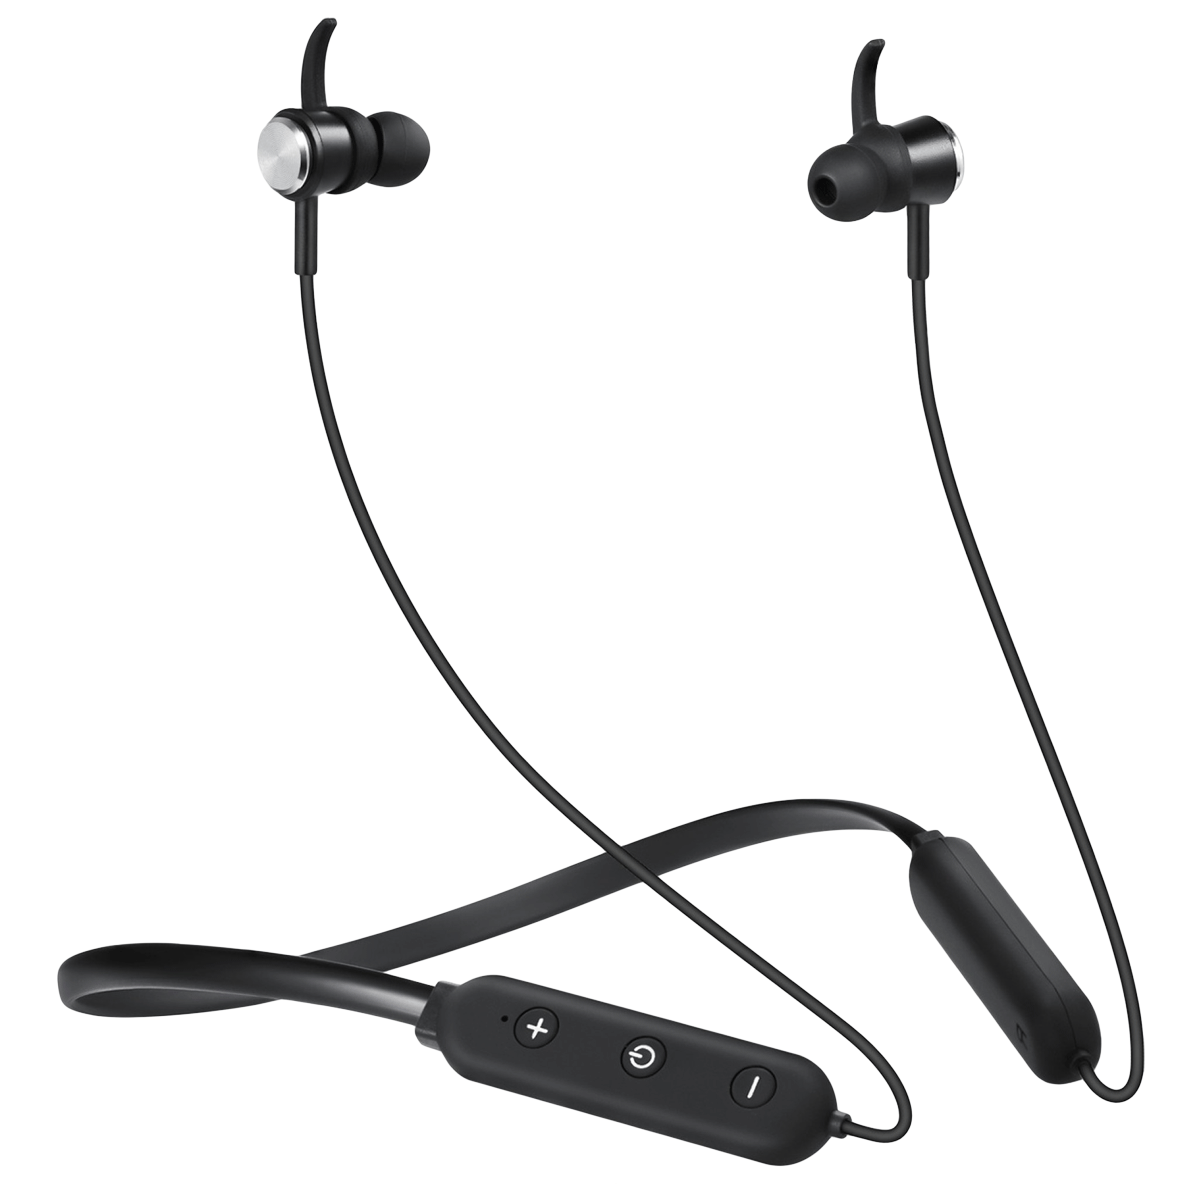 Boat Rockerz 275v2 In-Ear Wireless Earphone with Mic (Bluetooth 5.0, Voice Assistant Support, Black)_1